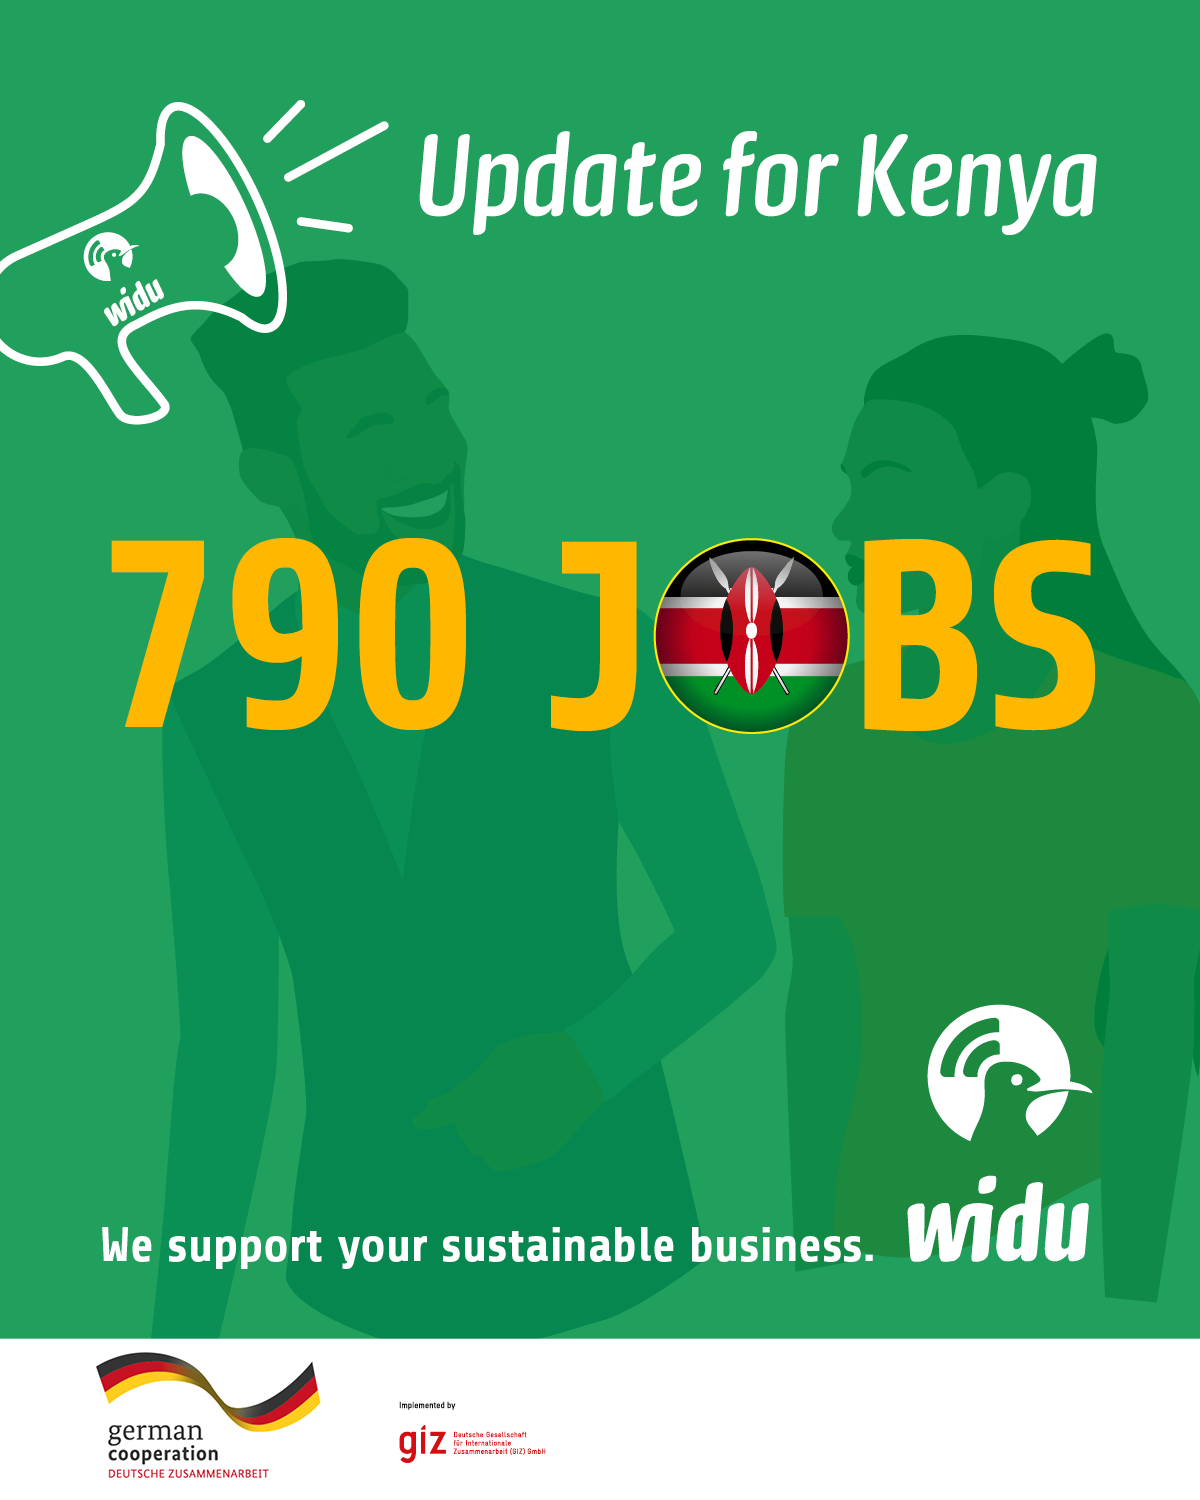 WIDU already created and sustained 790 jobs in Kenya